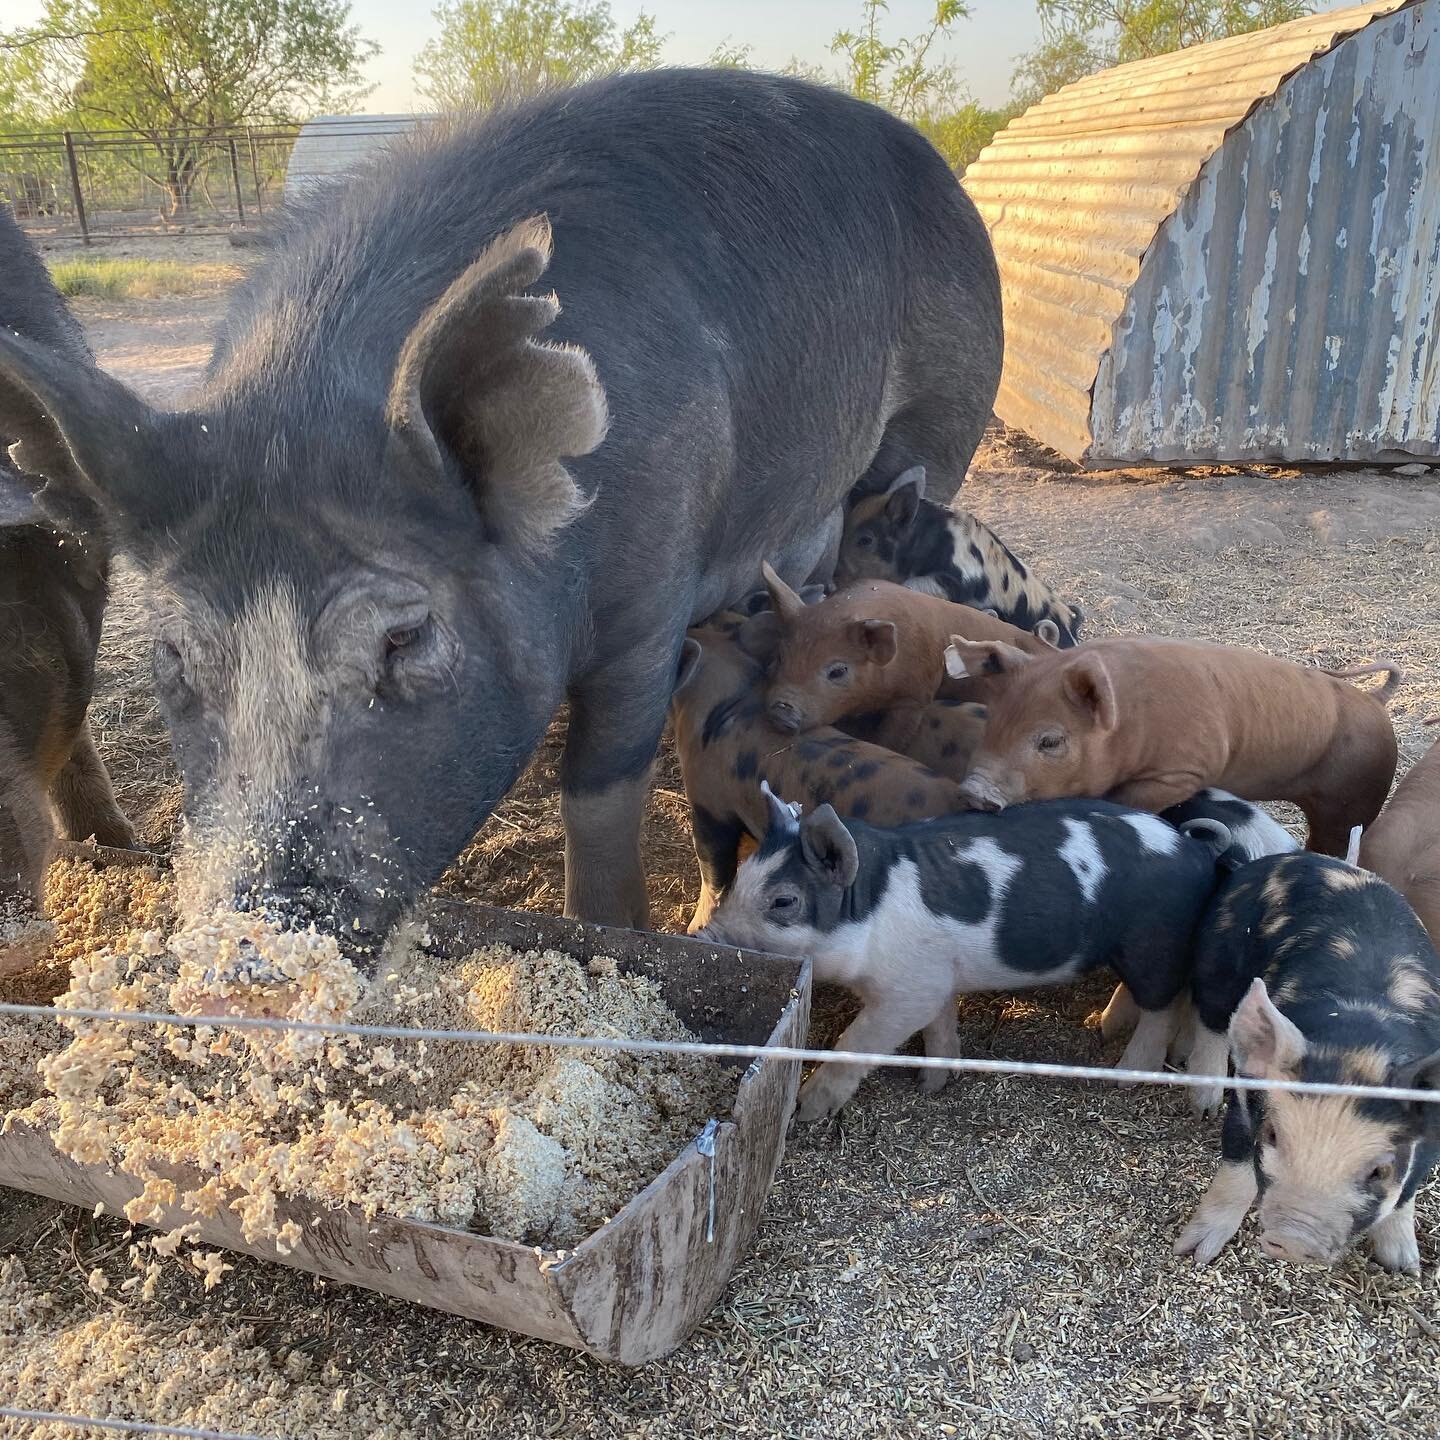 We have an unexpected update this morning. About a week ago, Micah and I were discussing the future of our pig raising. With close to 100 growers and weaners, we came to the conclusion that we need to cut down on the amount of pigs we raise, as its t